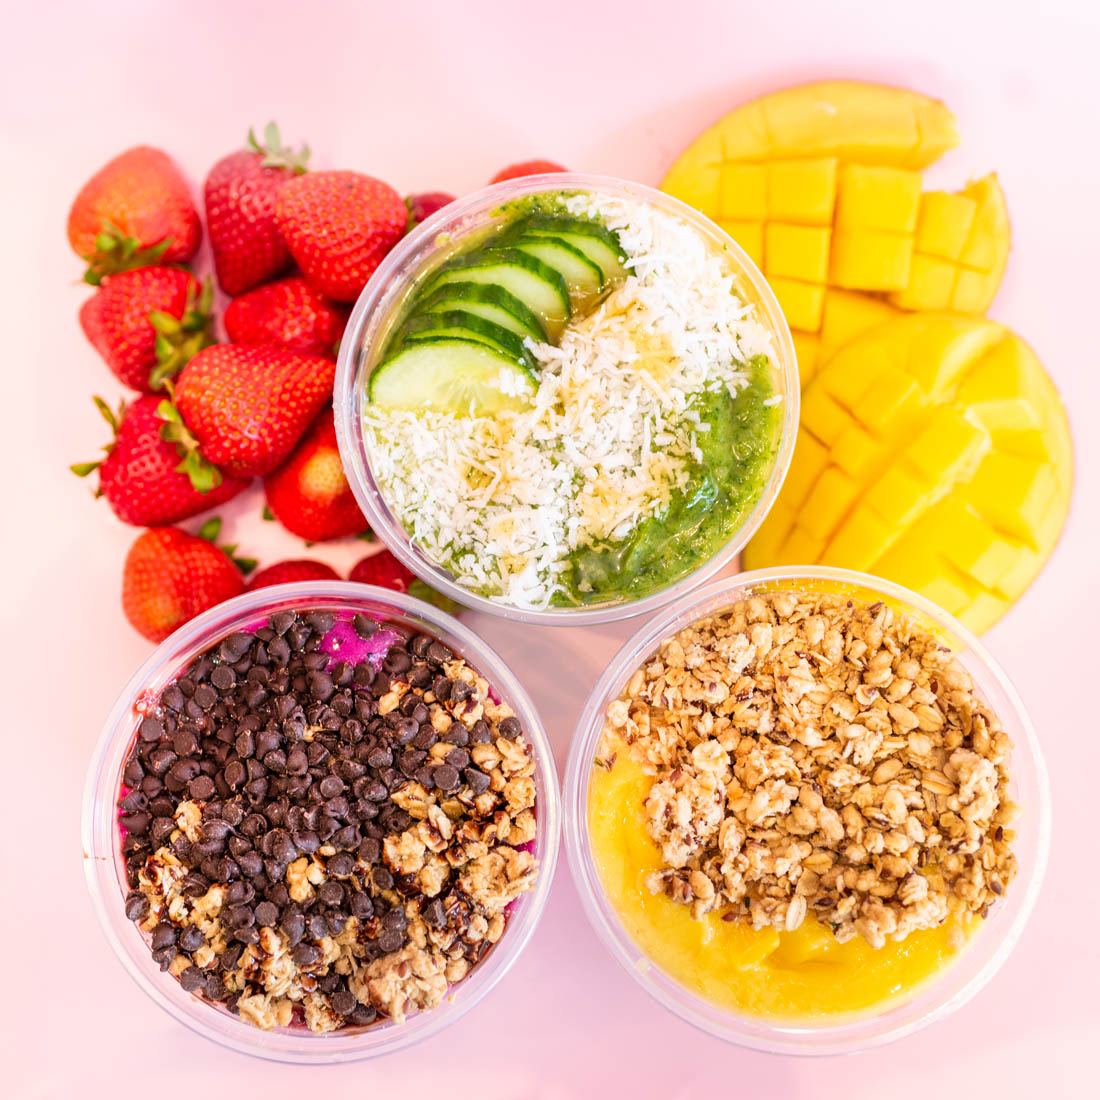 Rush Bowls smoothie bowls nutrition info in St. Louis, MO.